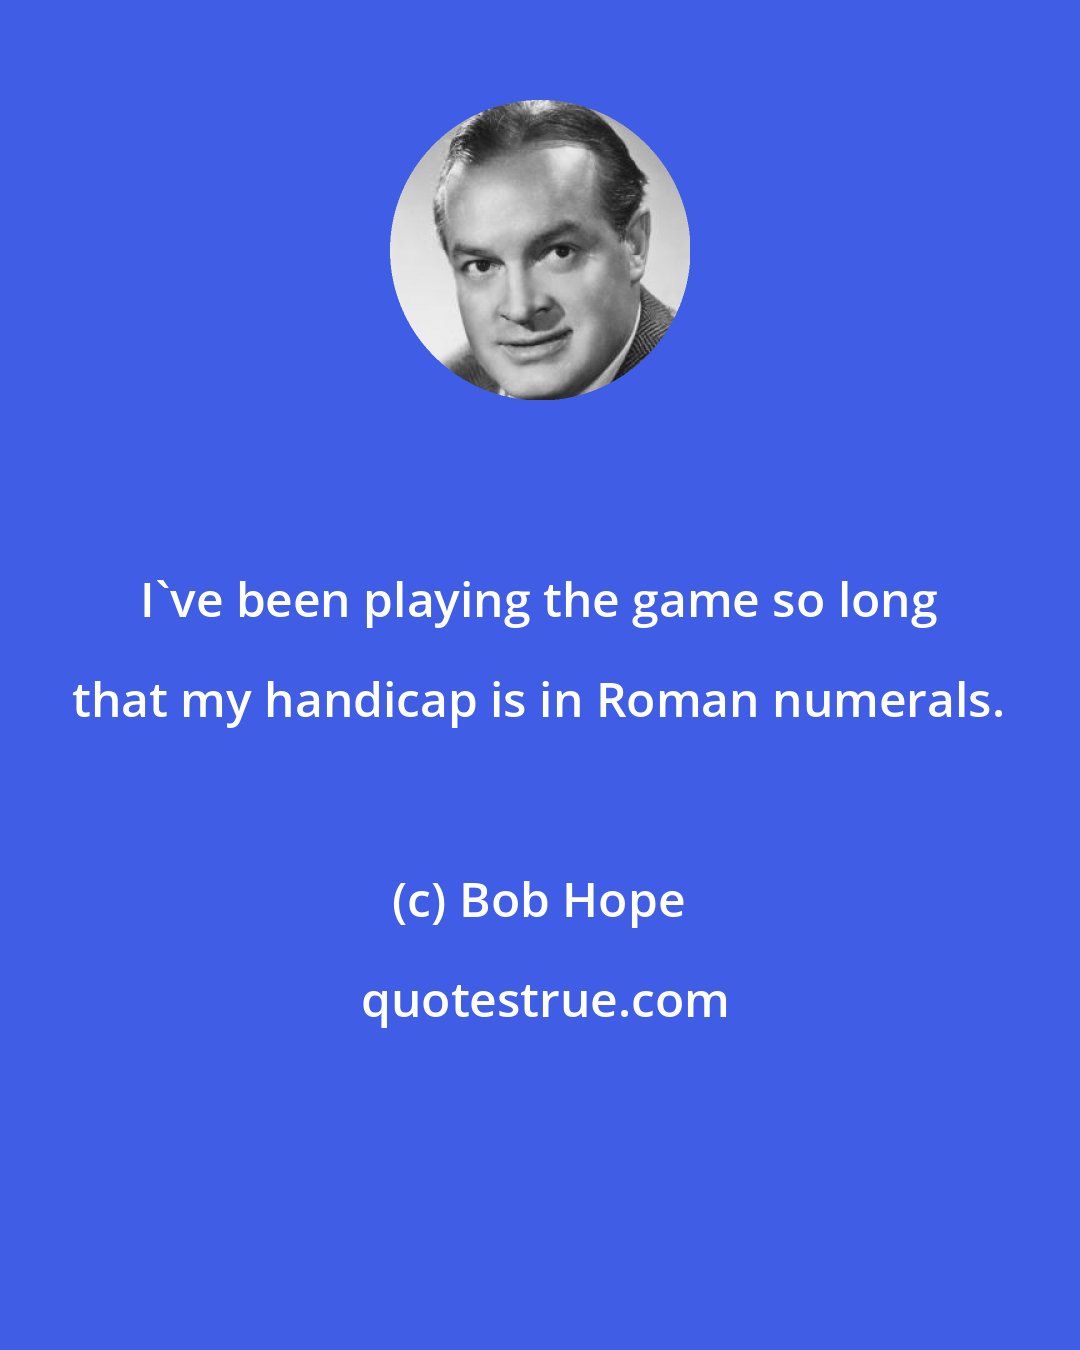 Bob Hope: I've been playing the game so long that my handicap is in Roman numerals.